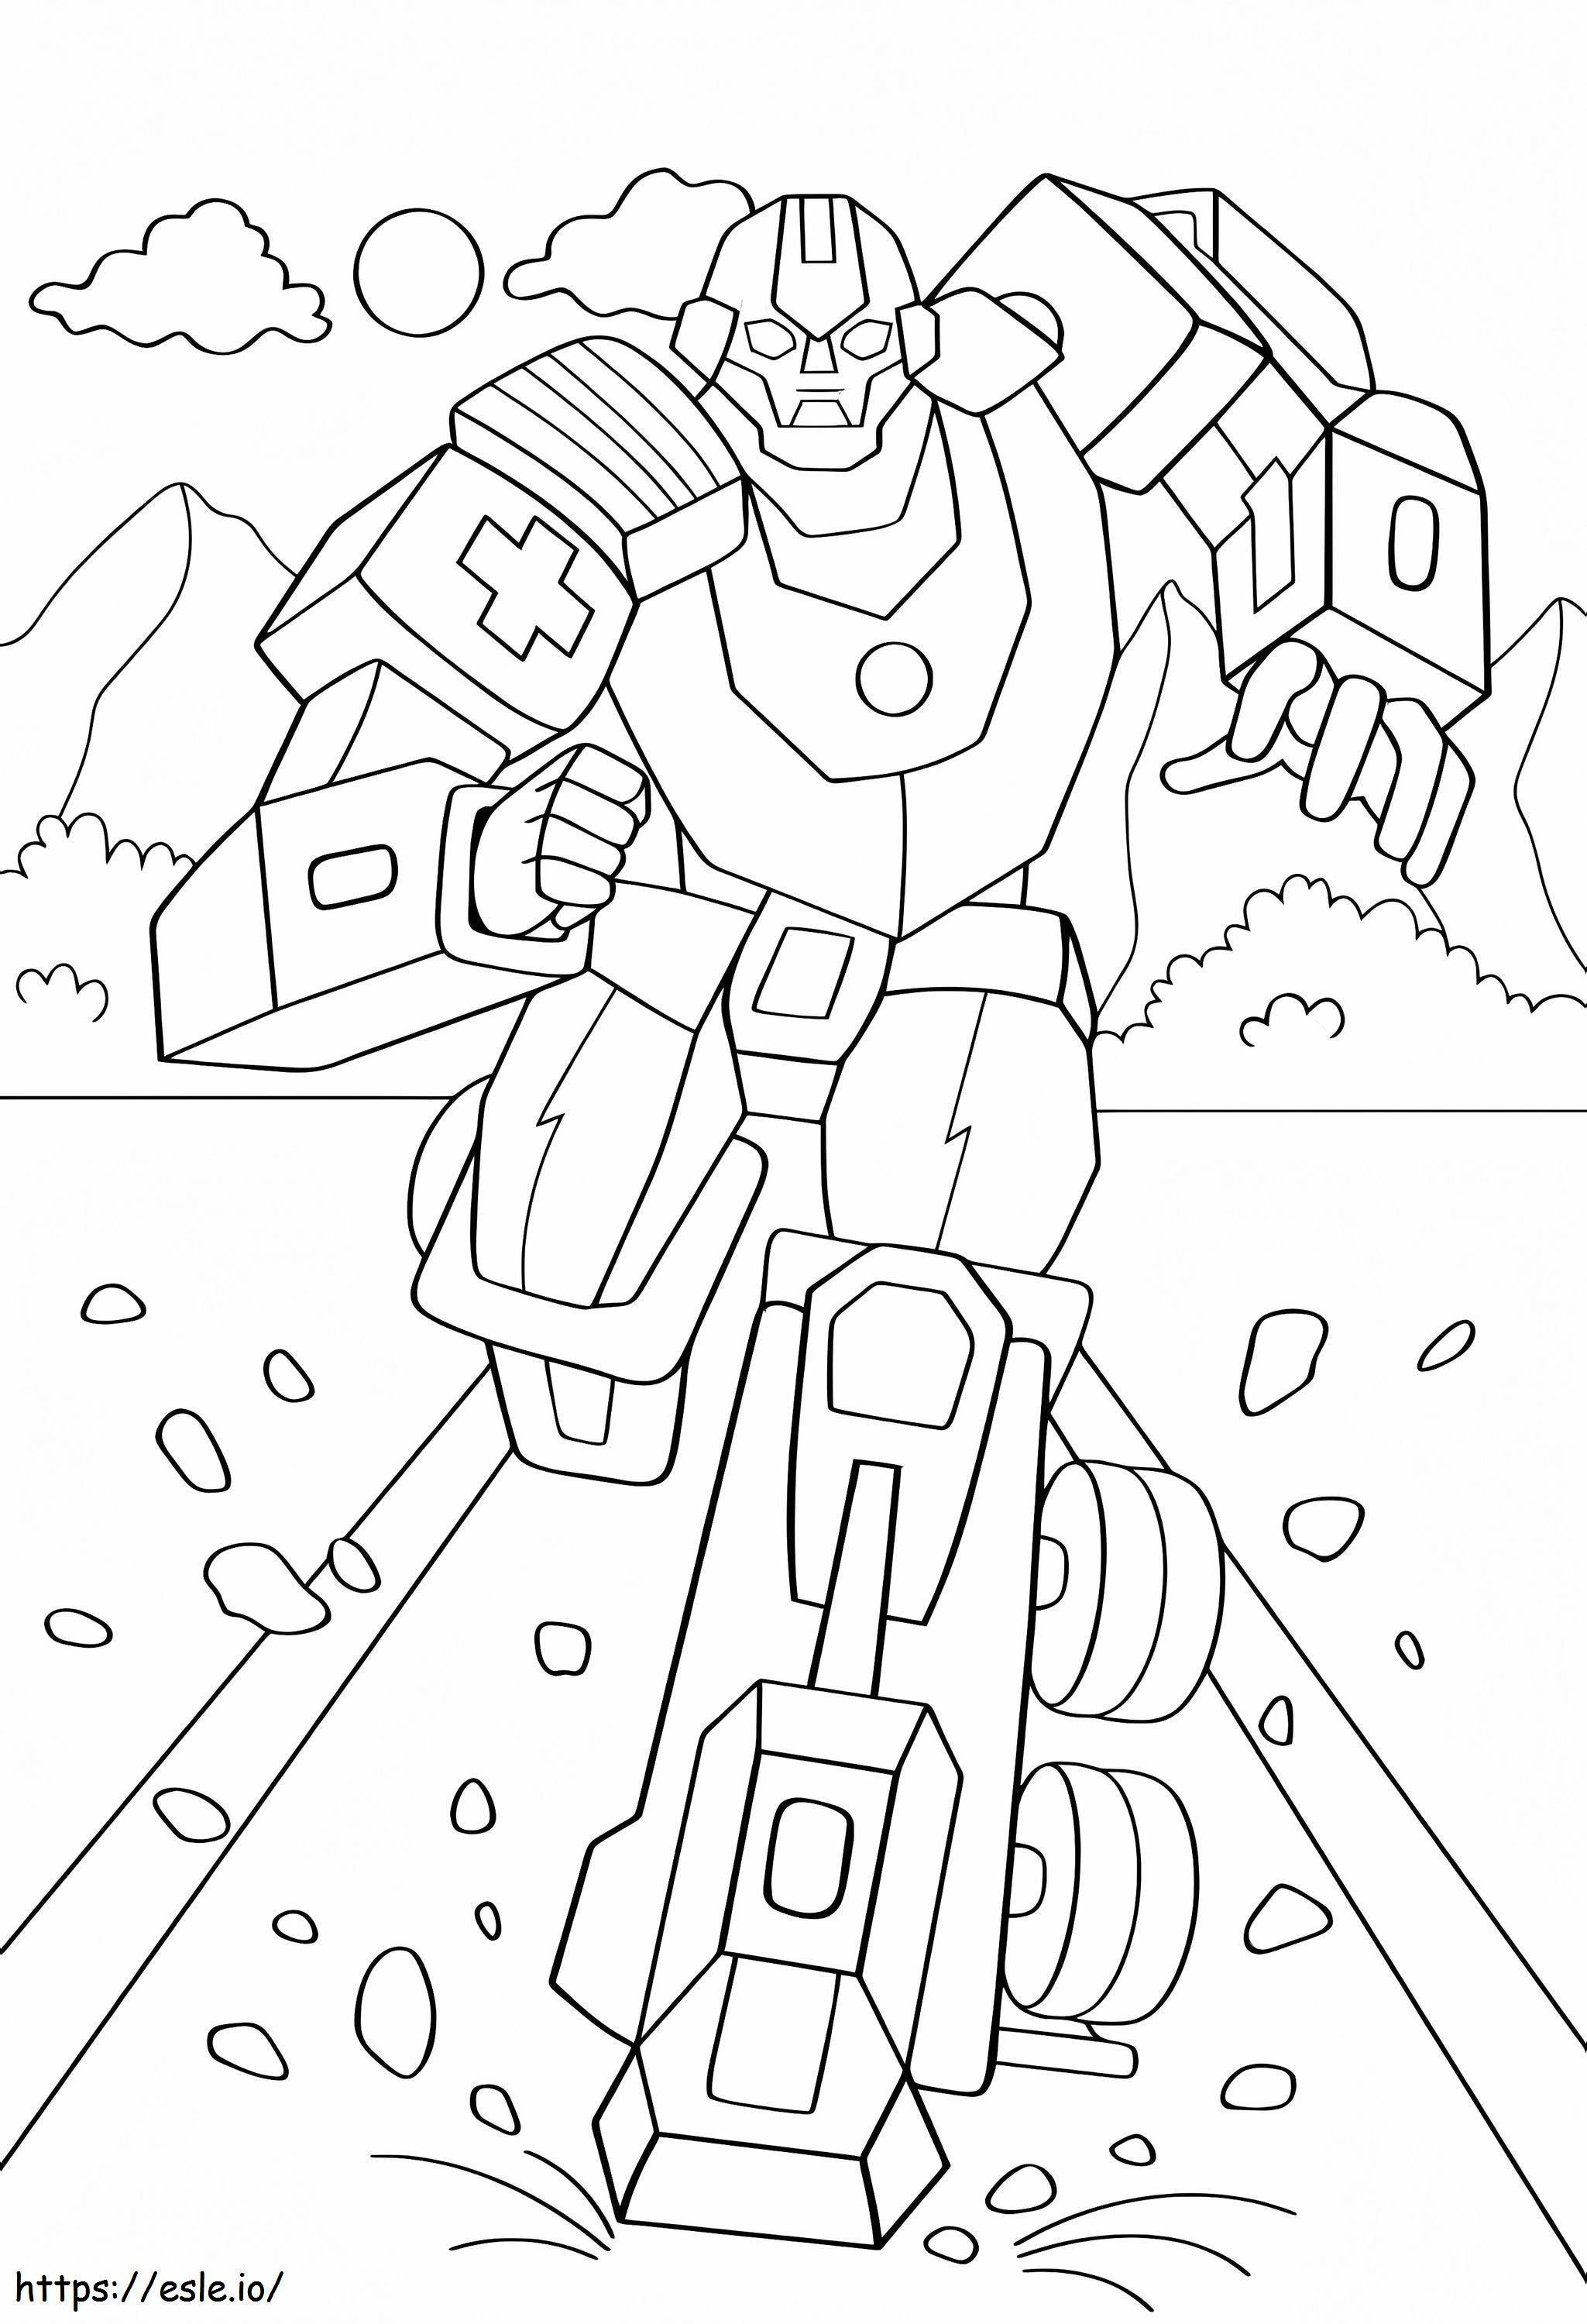 Cool Robot Boy Running coloring page